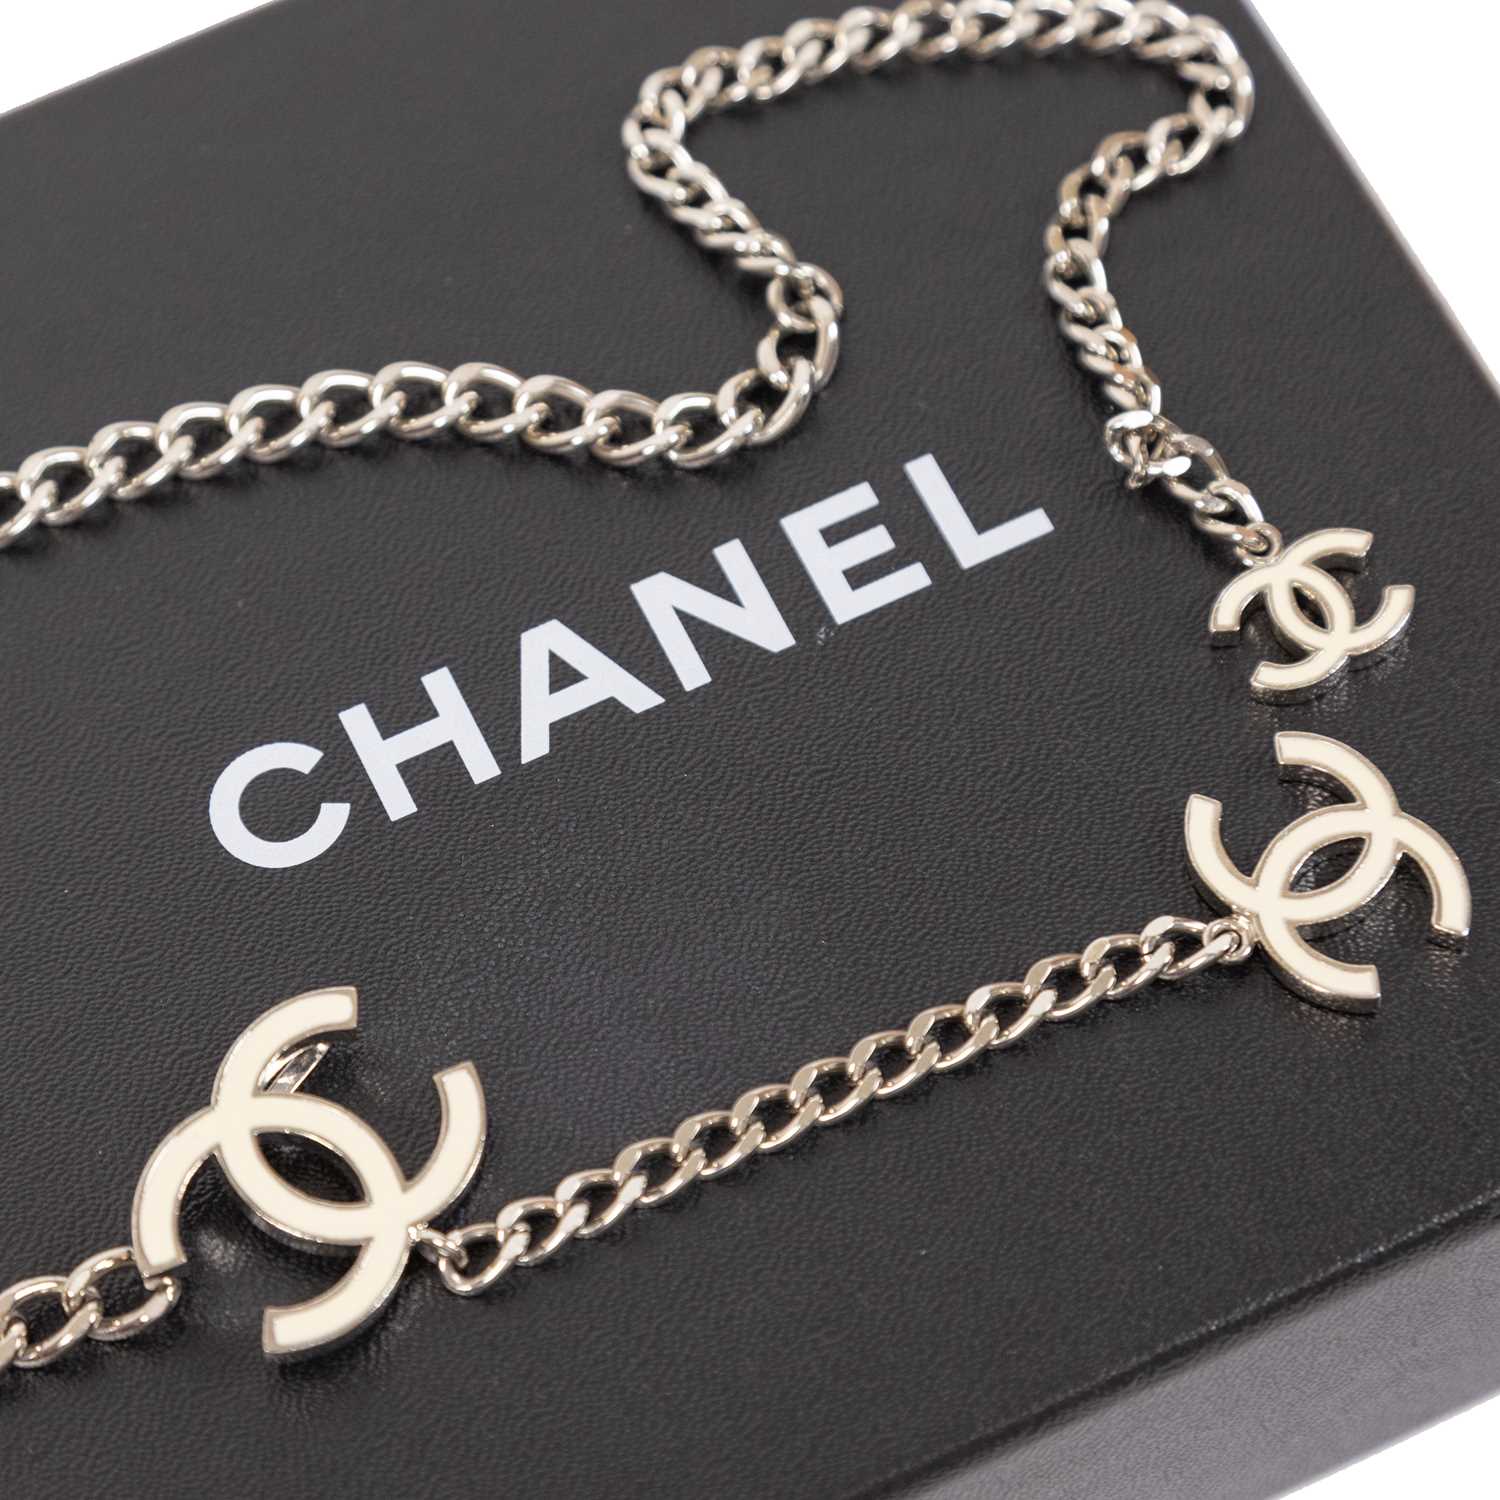 Lot 3024 - Chanel Chain Link Belt, in silvered colour,